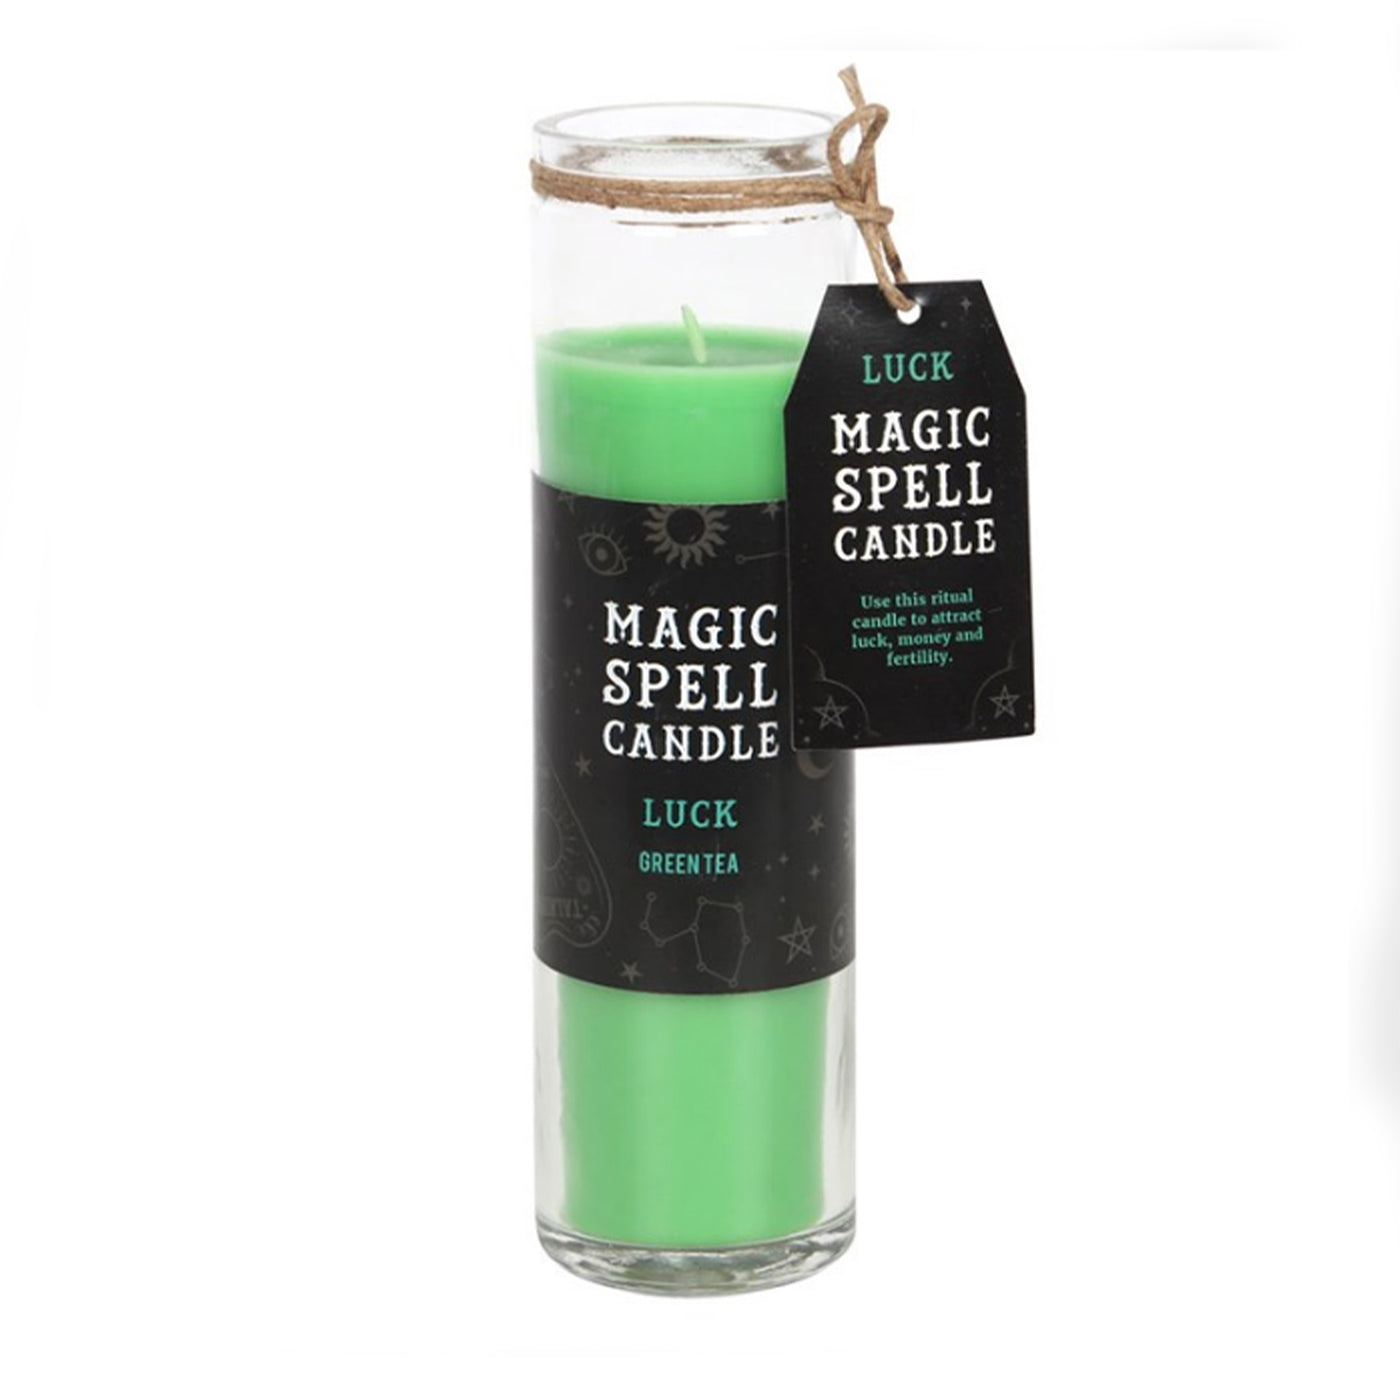 Green Tea 'Luck' Green Spell Tube Glass Candle.